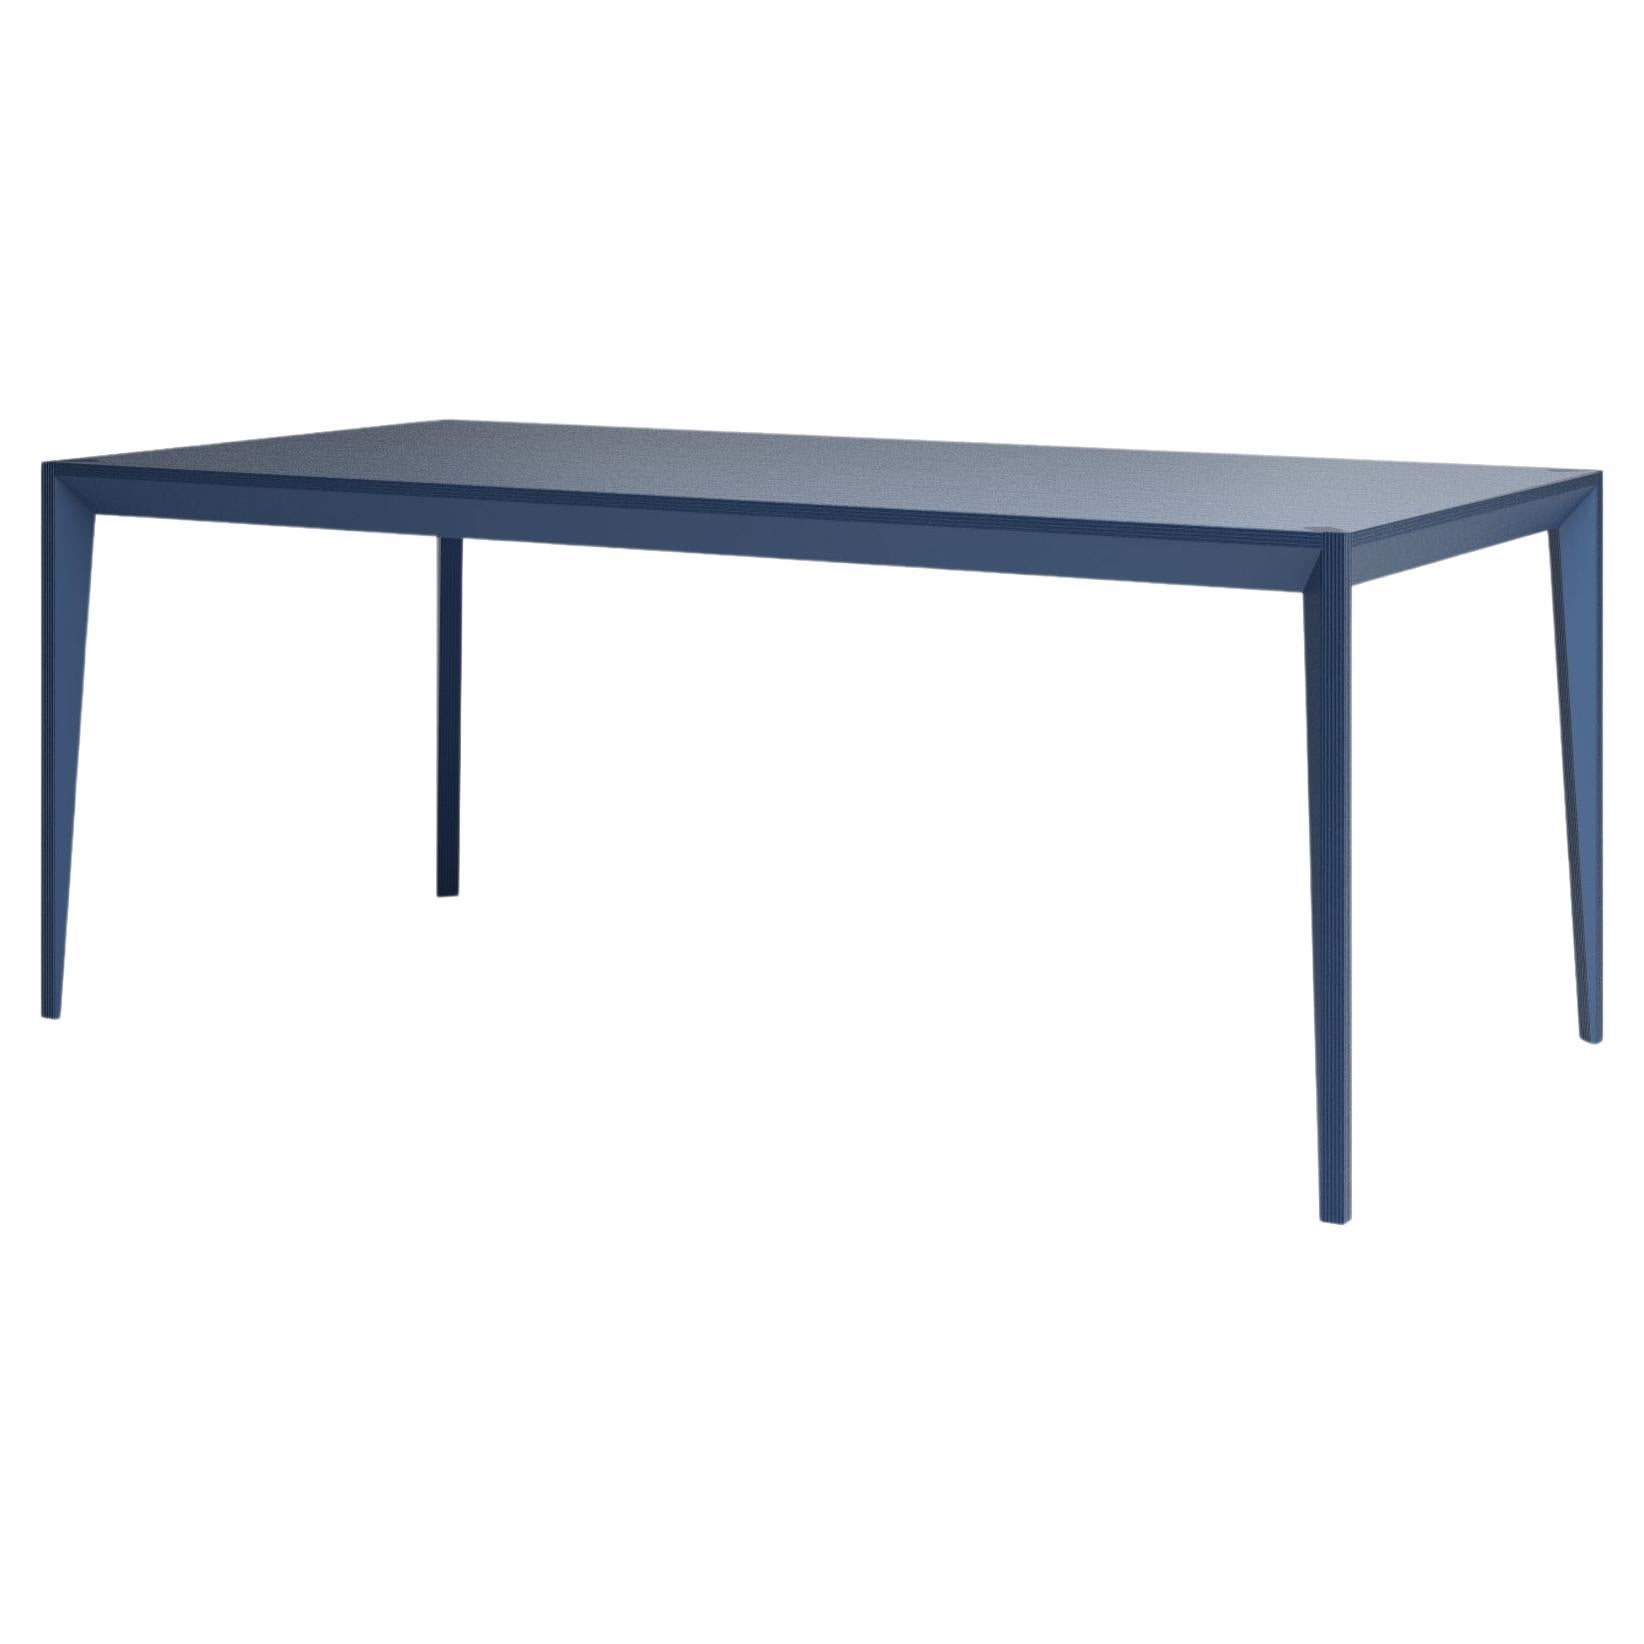 Cobalt All-Blue MiMi Wood Dining Table by Miduny, Made in Italy